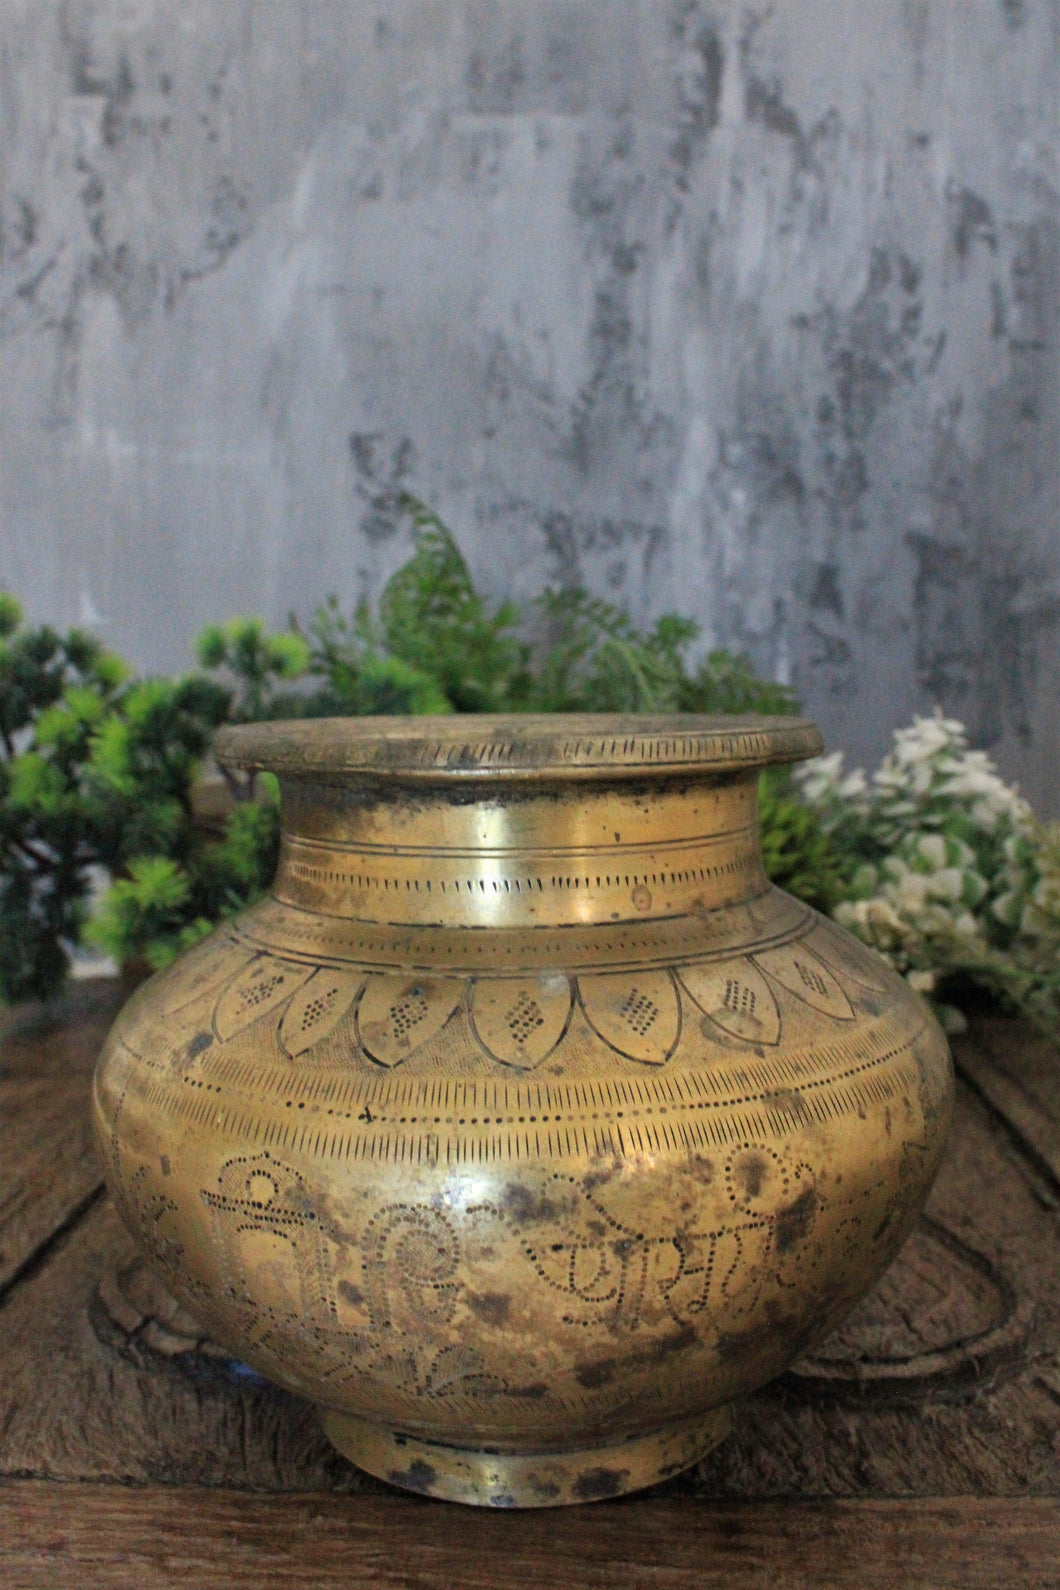 Beautifully Carved Brass Pot - Style It by Hanika